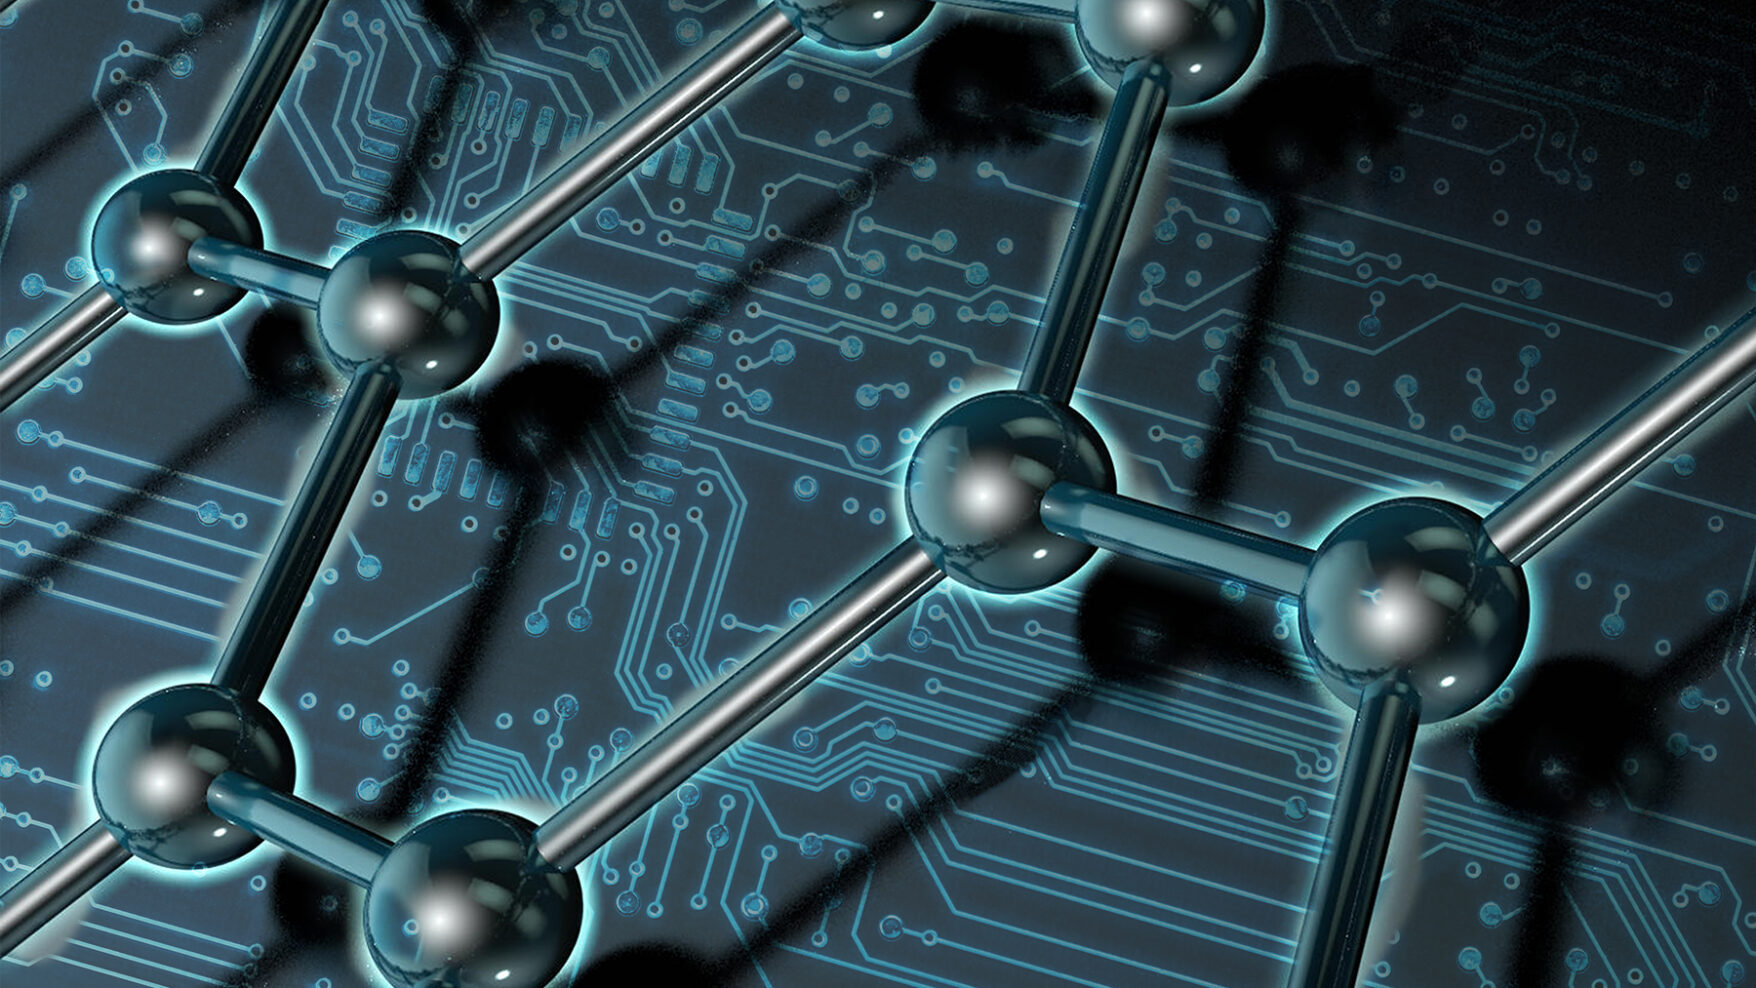 A digital rendering of carbon chains hovering over a circuit board background. The image is meant to convey the use of AI or supercomputing resources in the field of materials science.